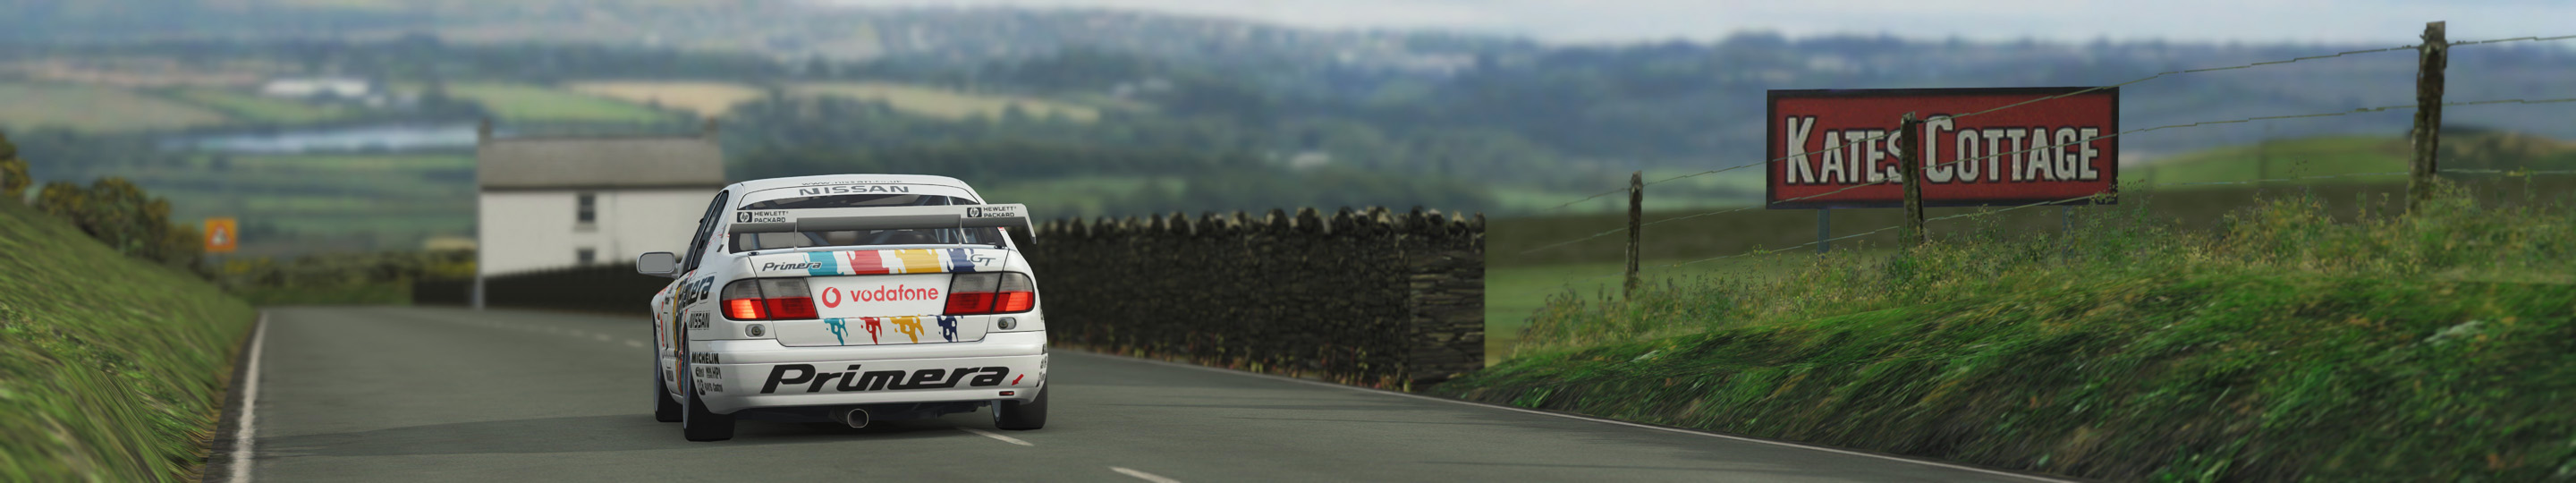 4 rFACTOR 2 ISLE of MAN by JIM PEARSON with NISSAN PRIMERA copy.jpg